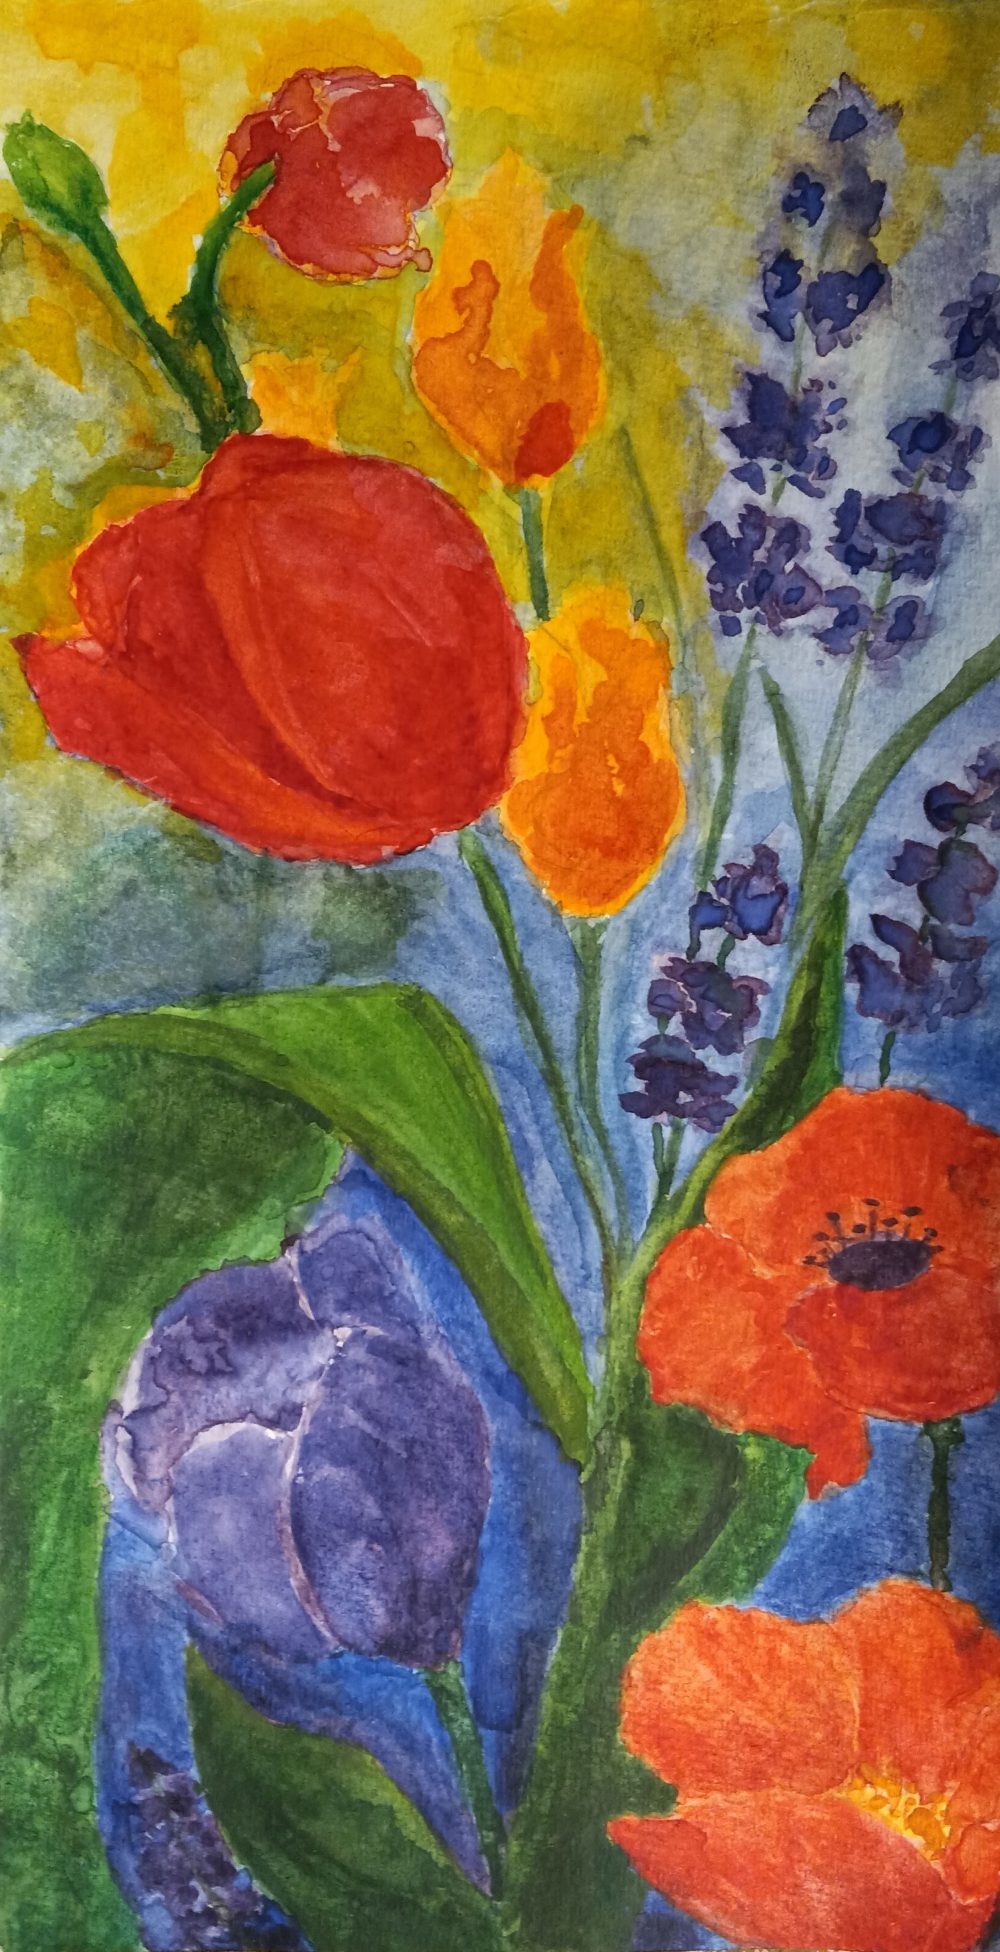 A vertical water color painting of poppies, lavenders, and tulips.